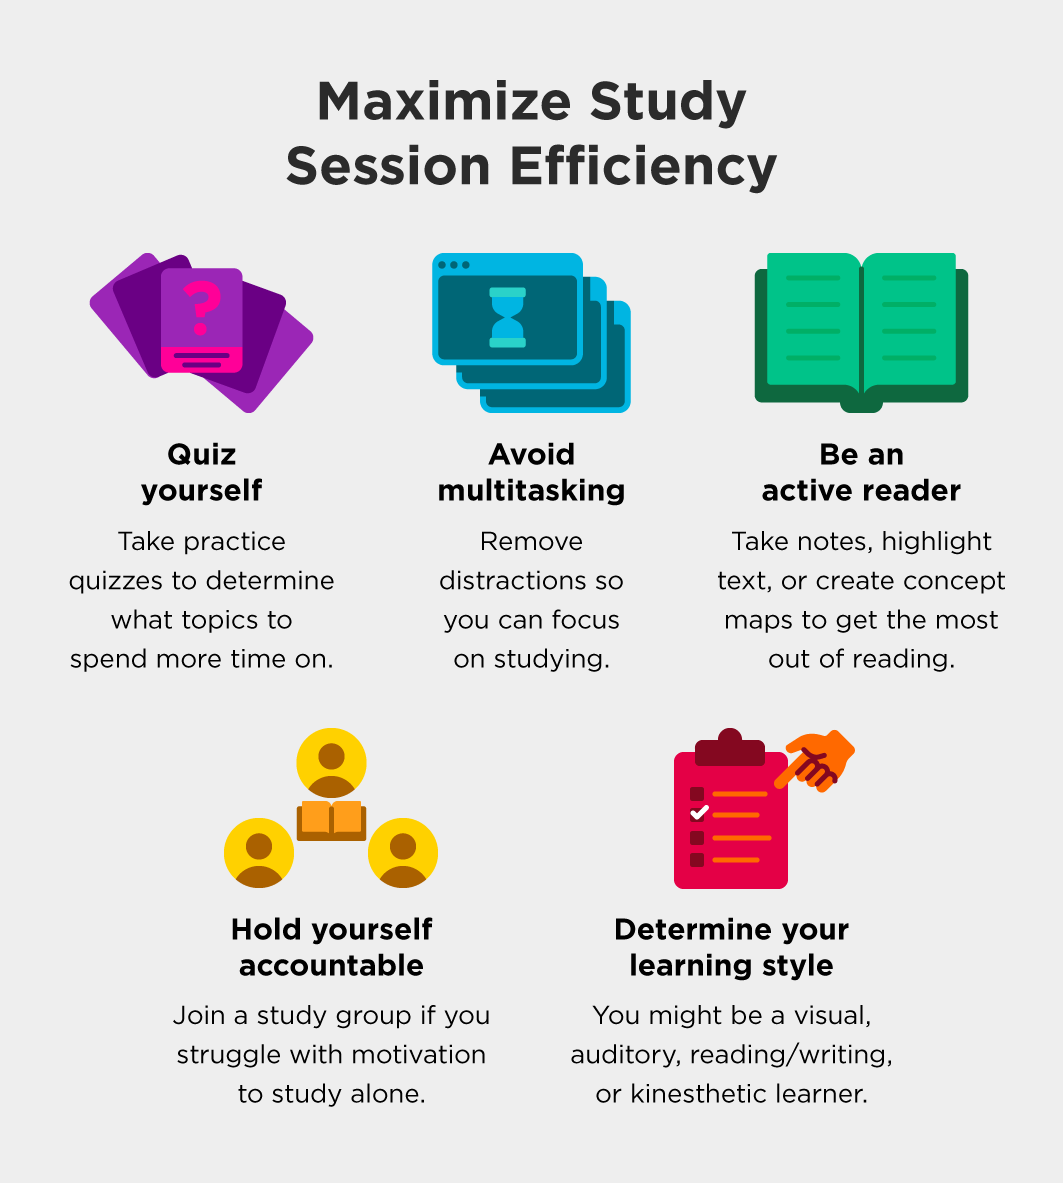 Image recaps tips to make study sessions more efficient.